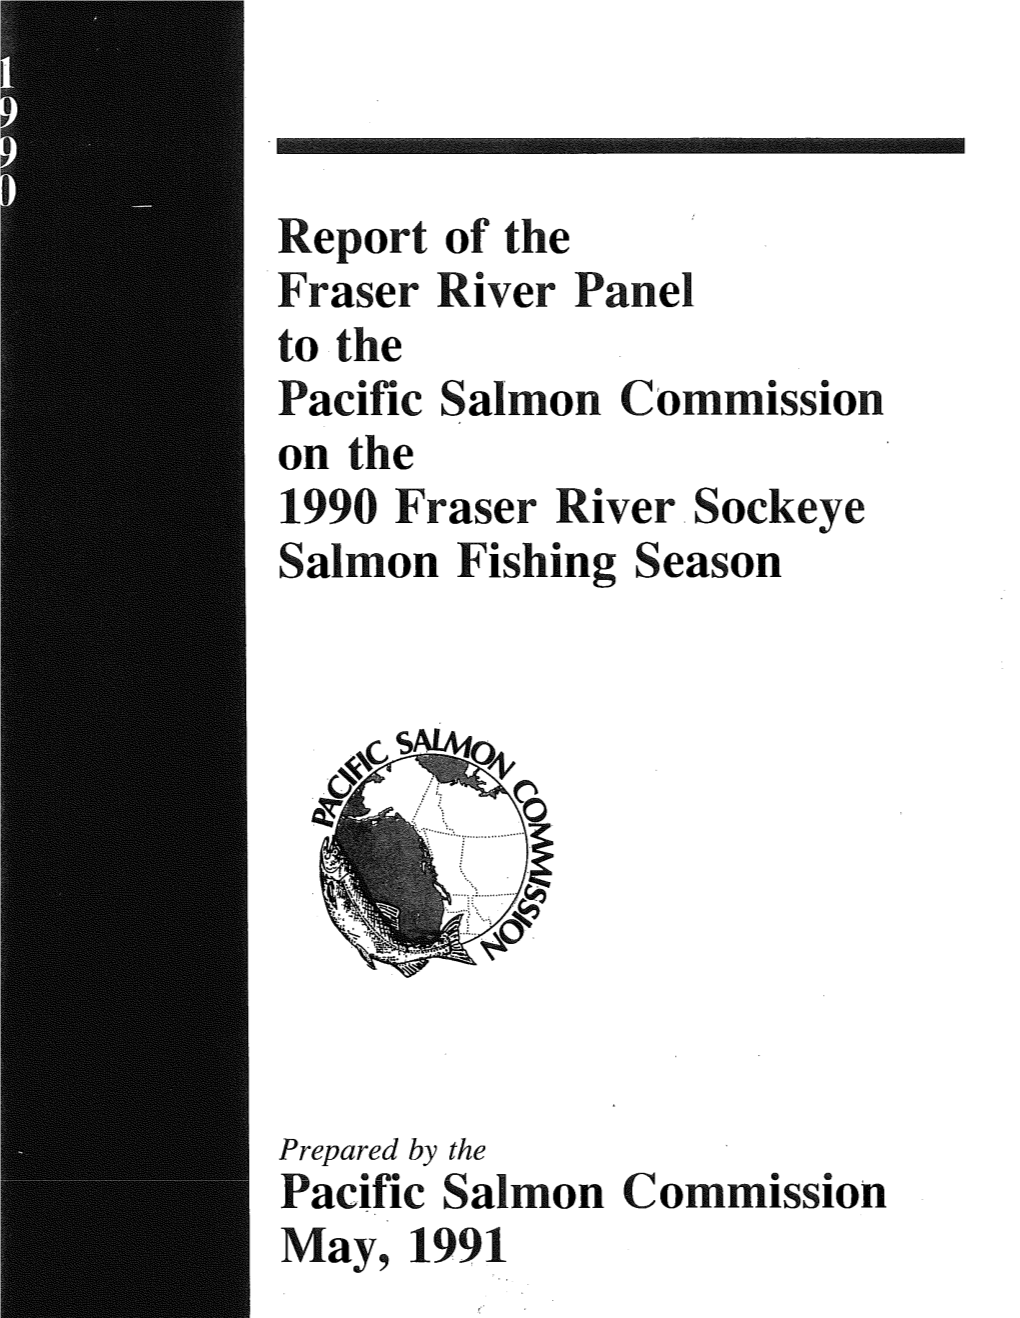 Report of the Fraser River Panel to the Pacific Salmon Commission on the 1990 Fraser River Sockeye Salmon Fishing Season